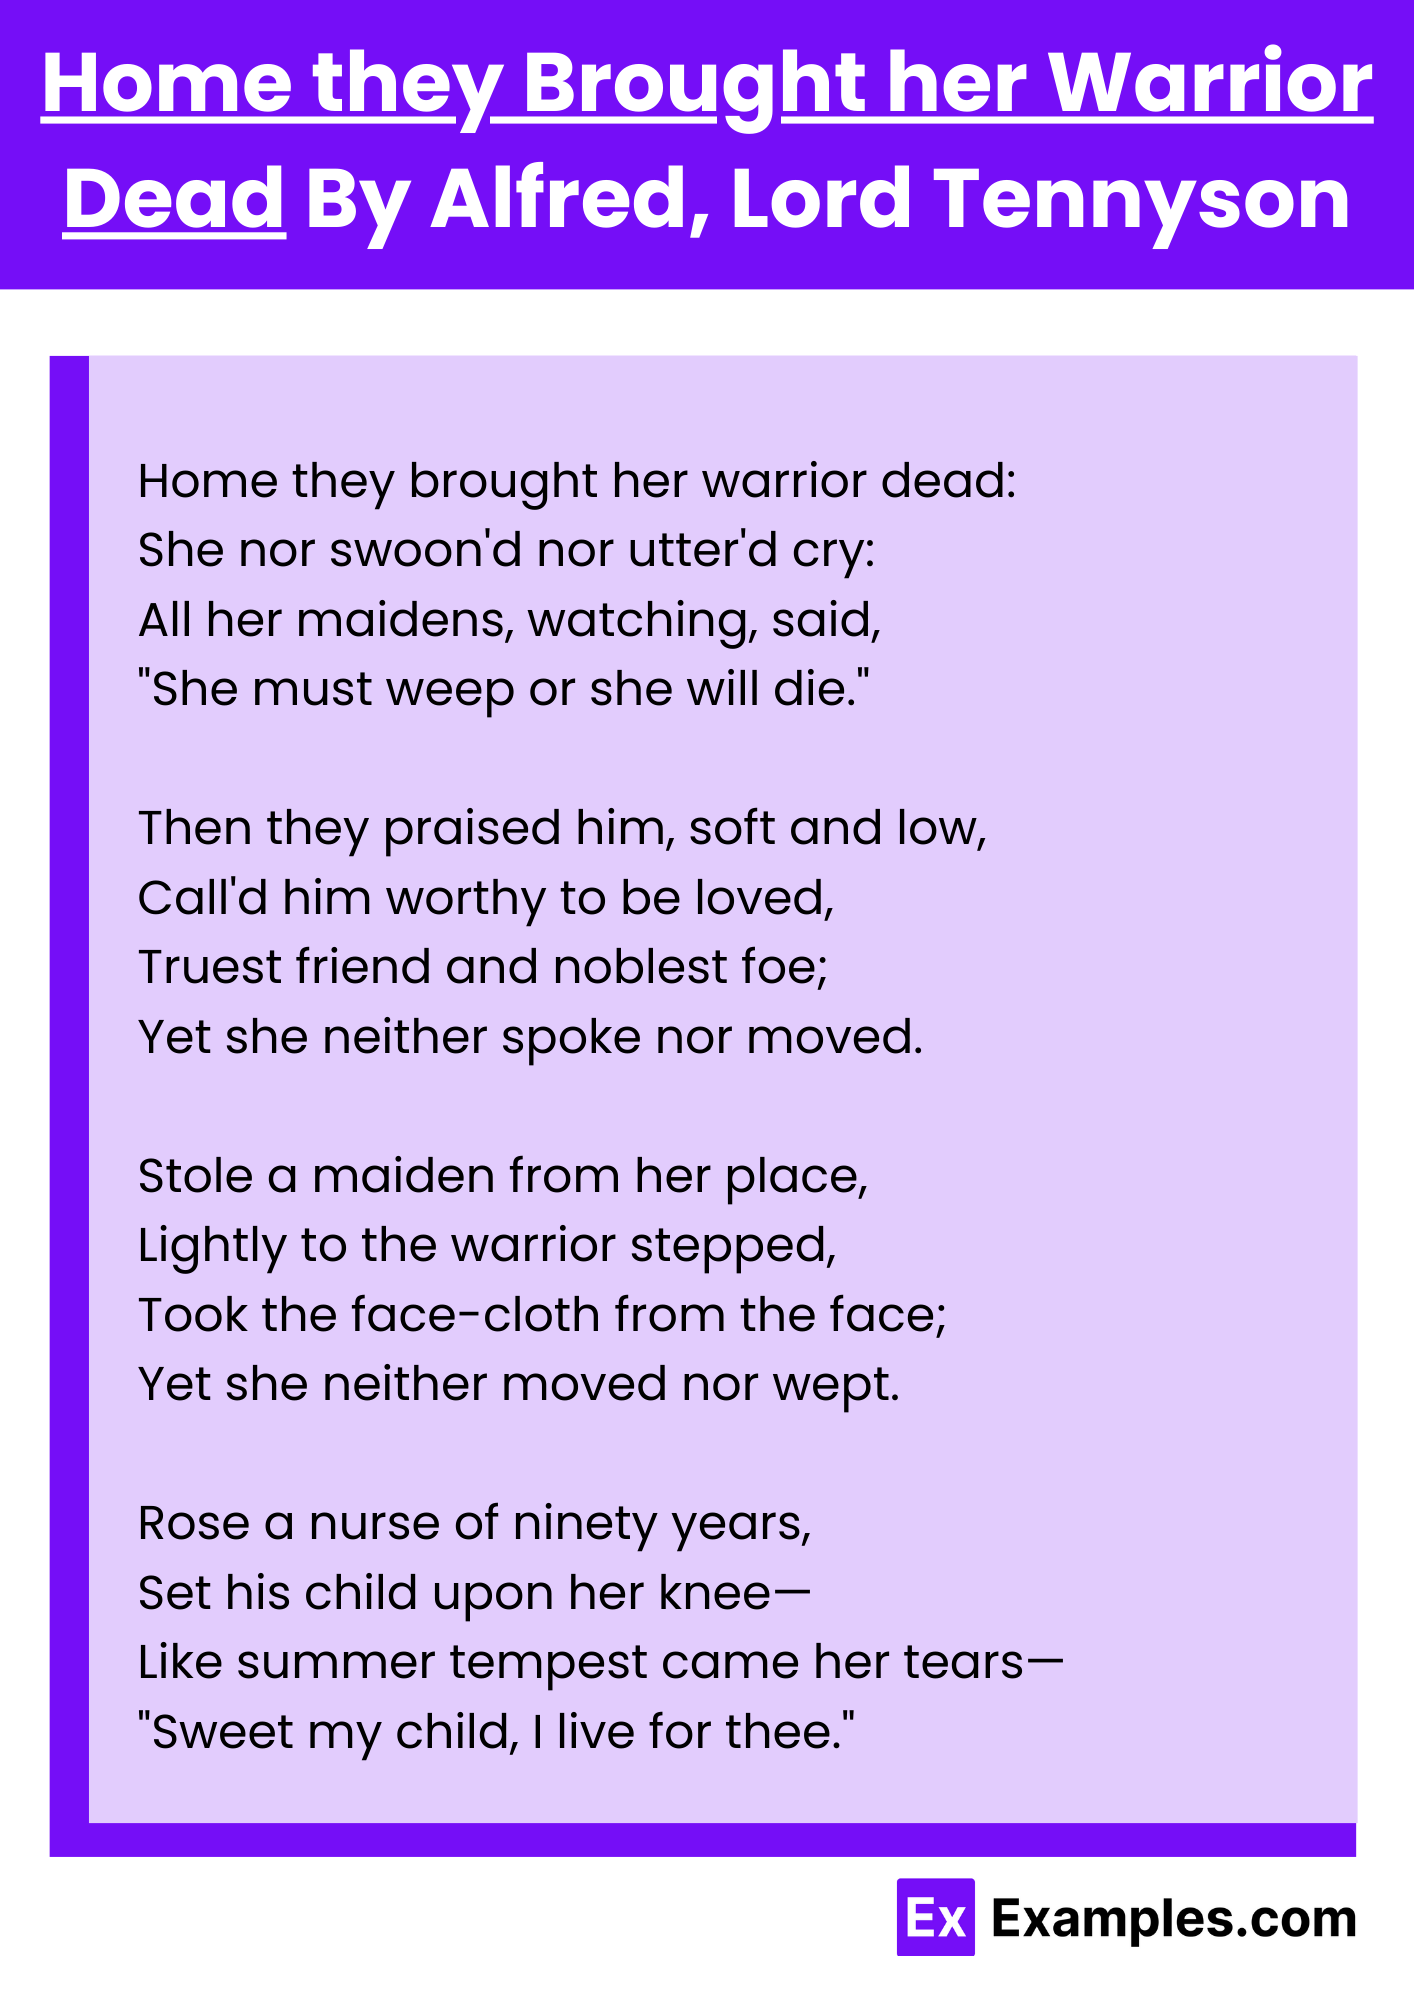 Home they Brought her Warrior Dead By Alfred, Lord Tennyson